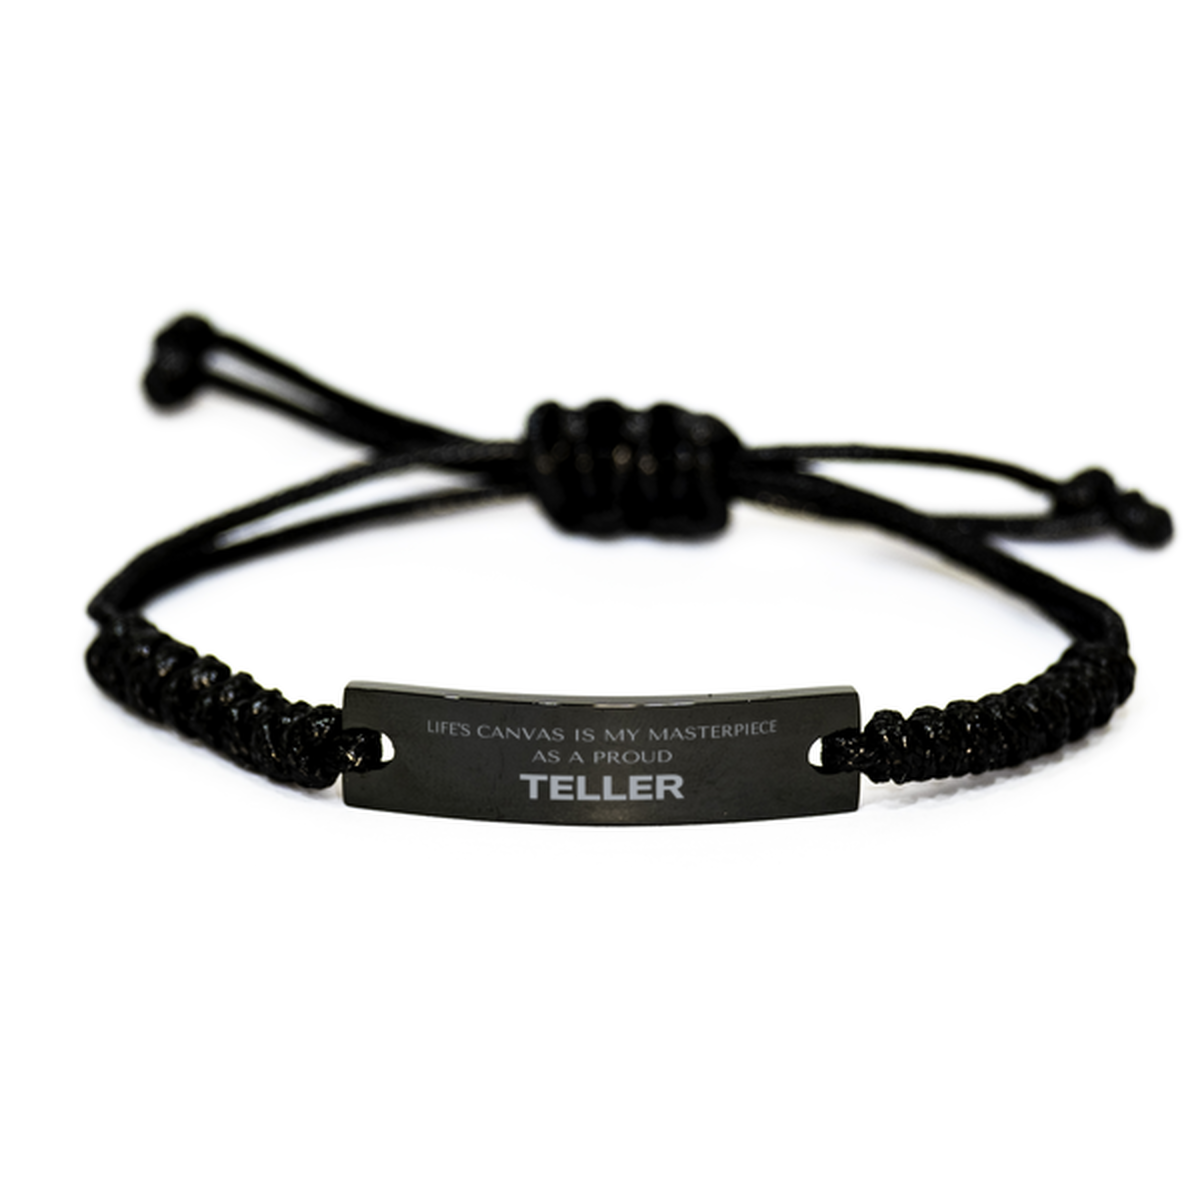 Proud Teller Gifts, Life's canvas is my masterpiece, Epic Birthday Christmas Unique Black Rope Bracelet For Teller, Coworkers, Men, Women, Friends